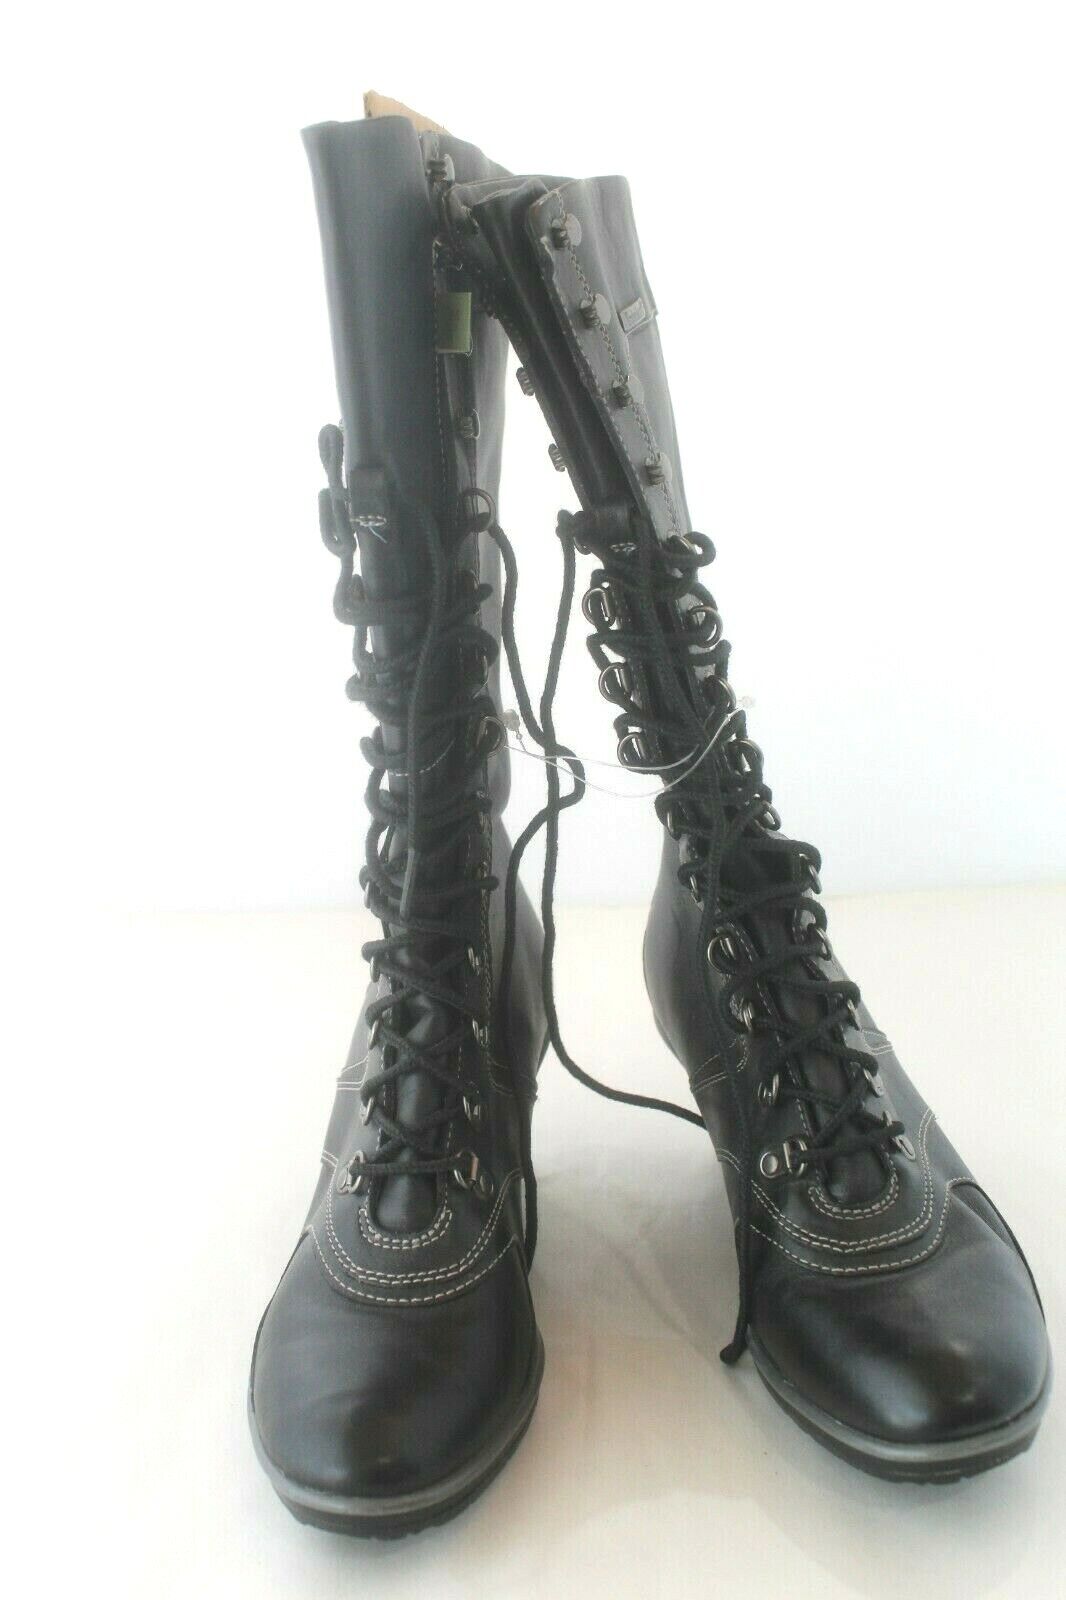 MINT Timberland 89360 Black Leather Lace Up Wedge Knee High Womens Boots sz 7.5M